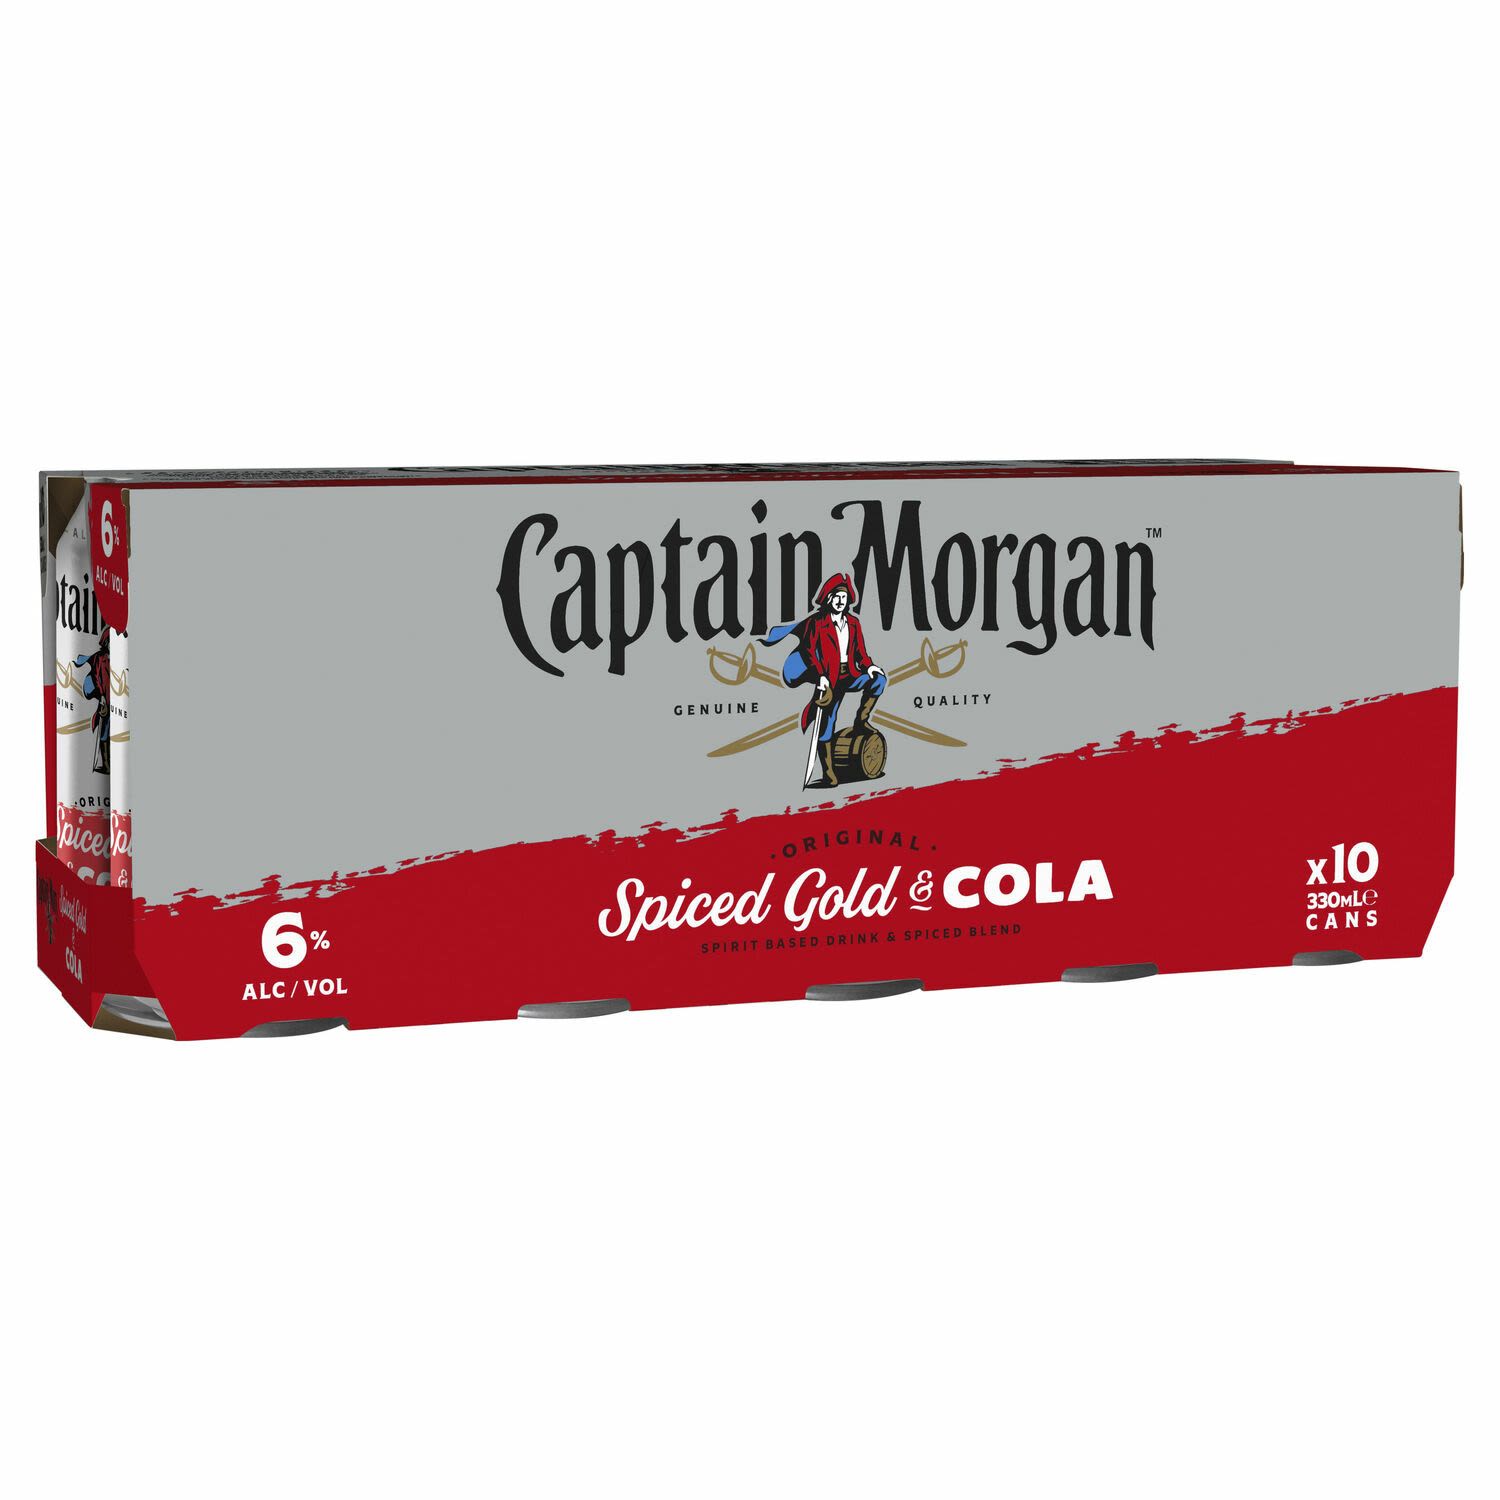 Captain Morgan & Cola 6% Can 330mL 10 Pack